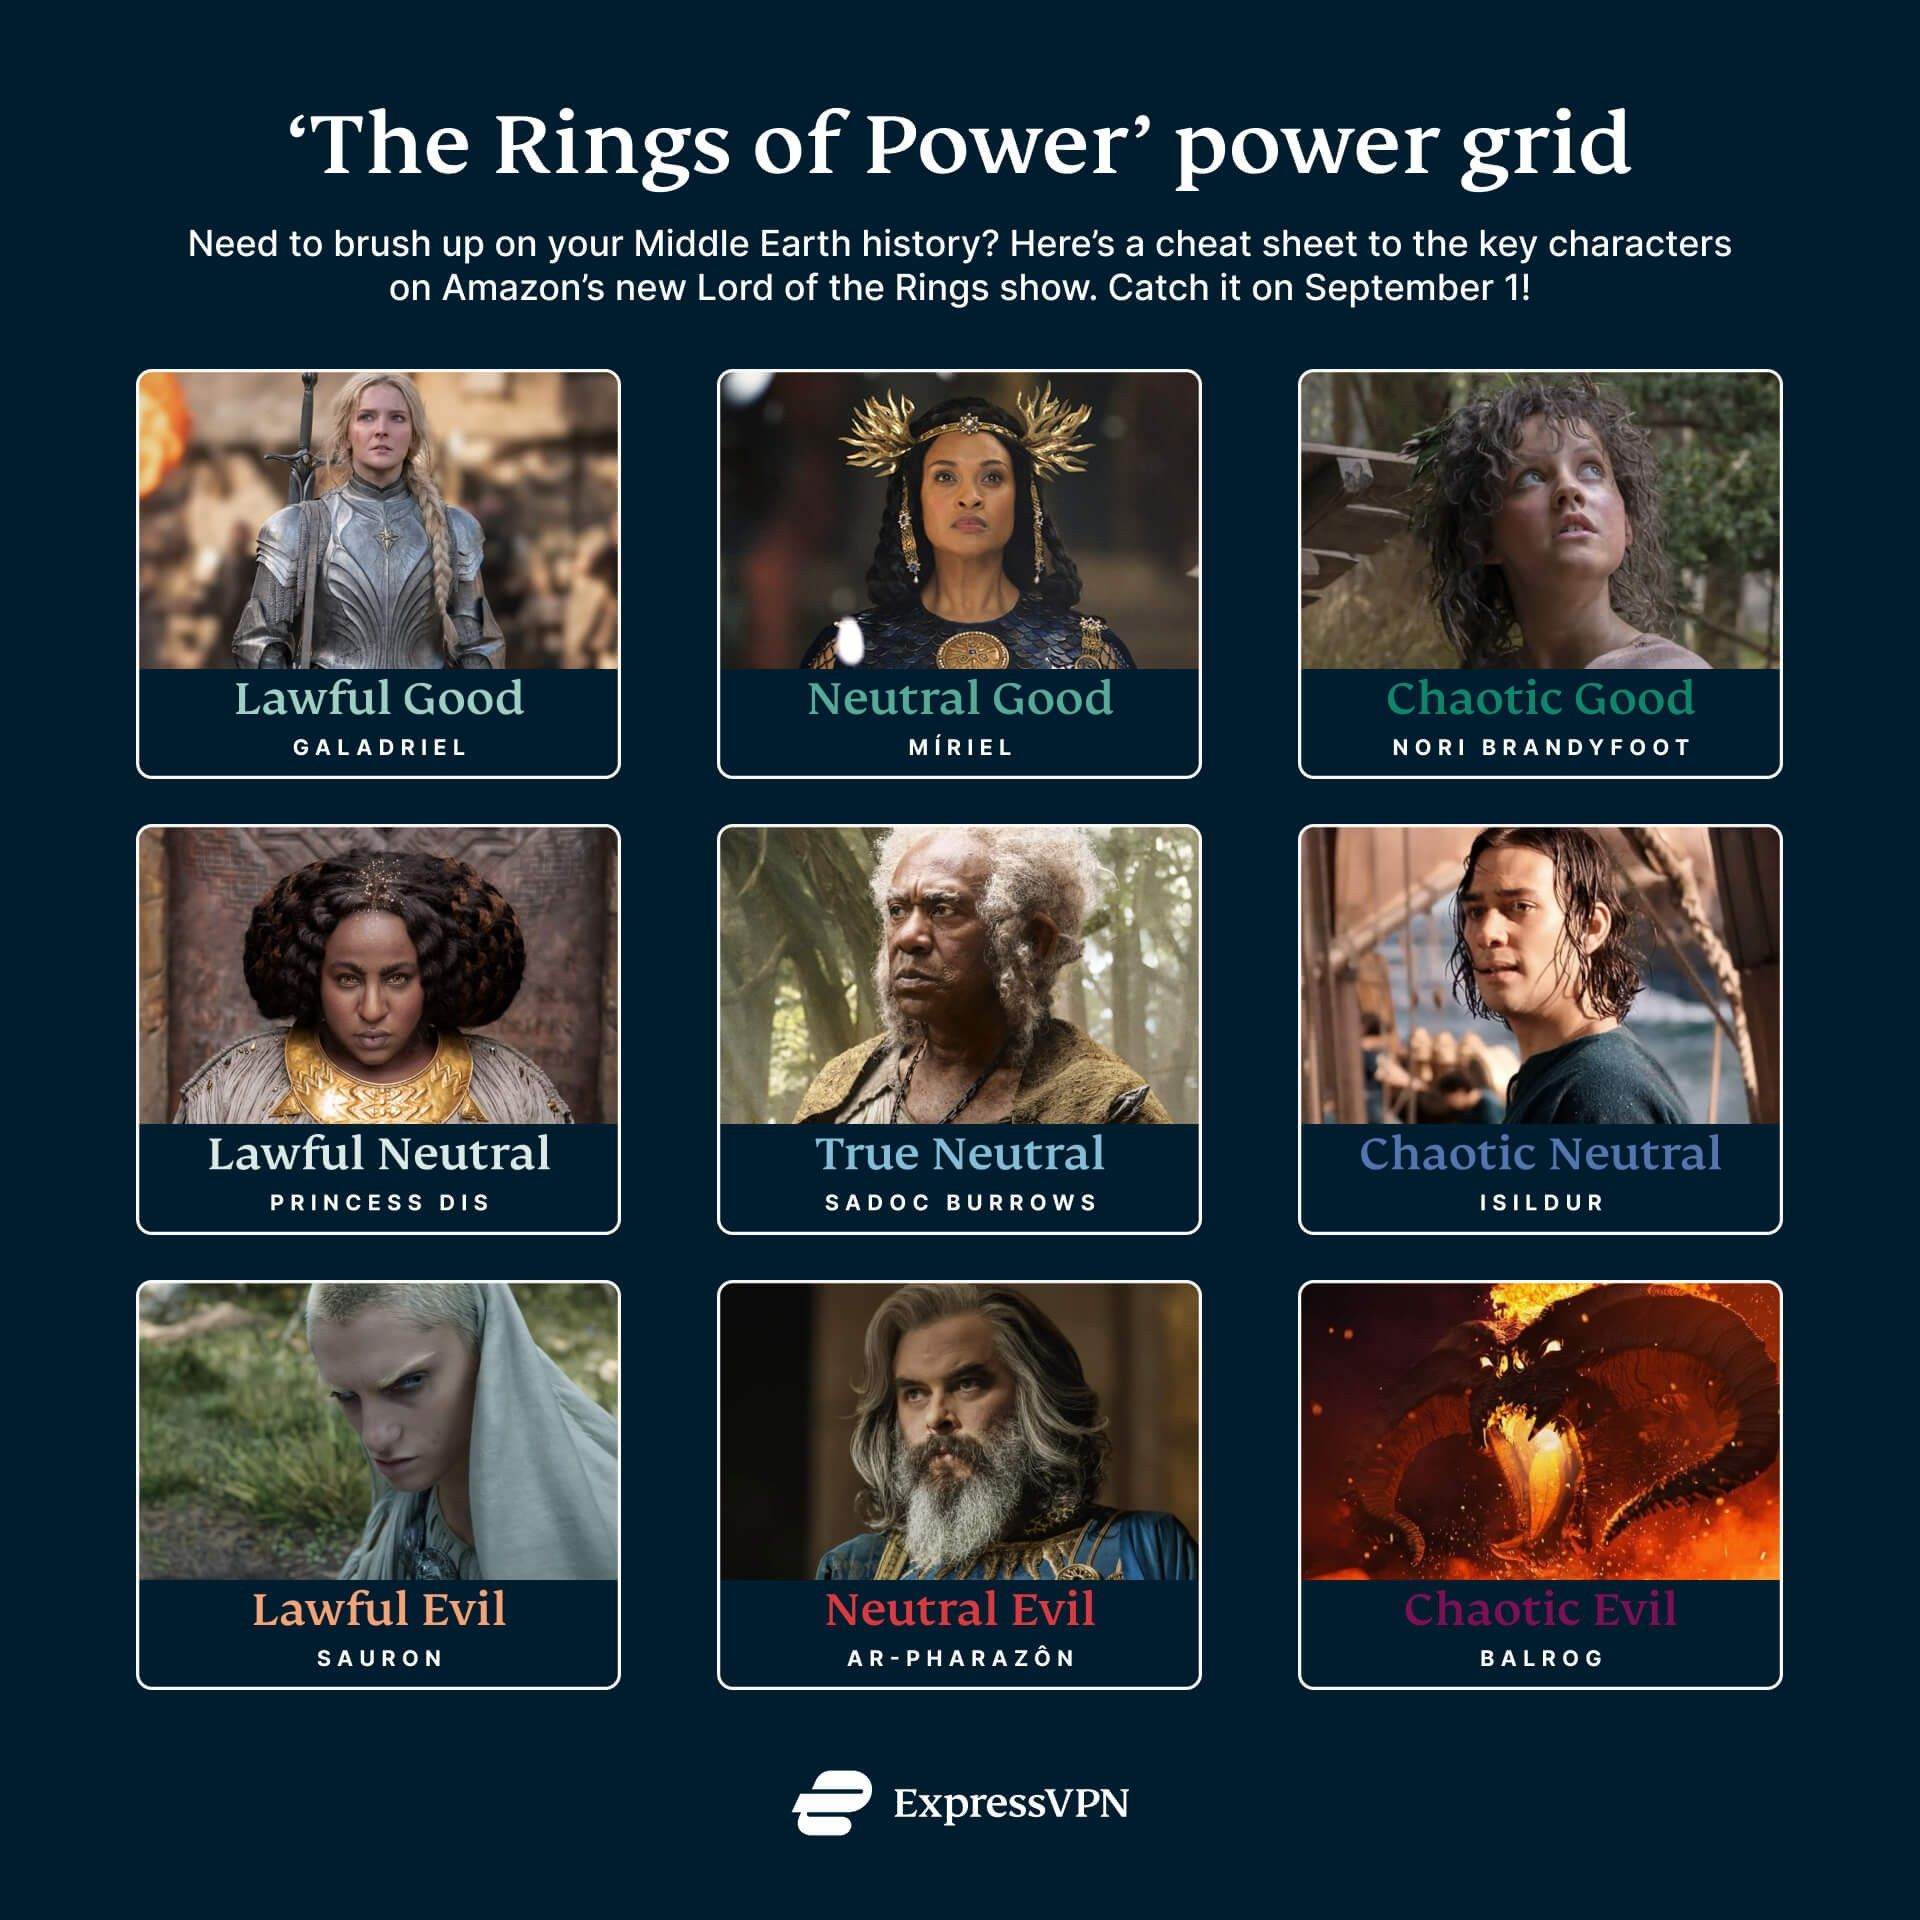 A cheat sheet to the key characters on The Rings of Power